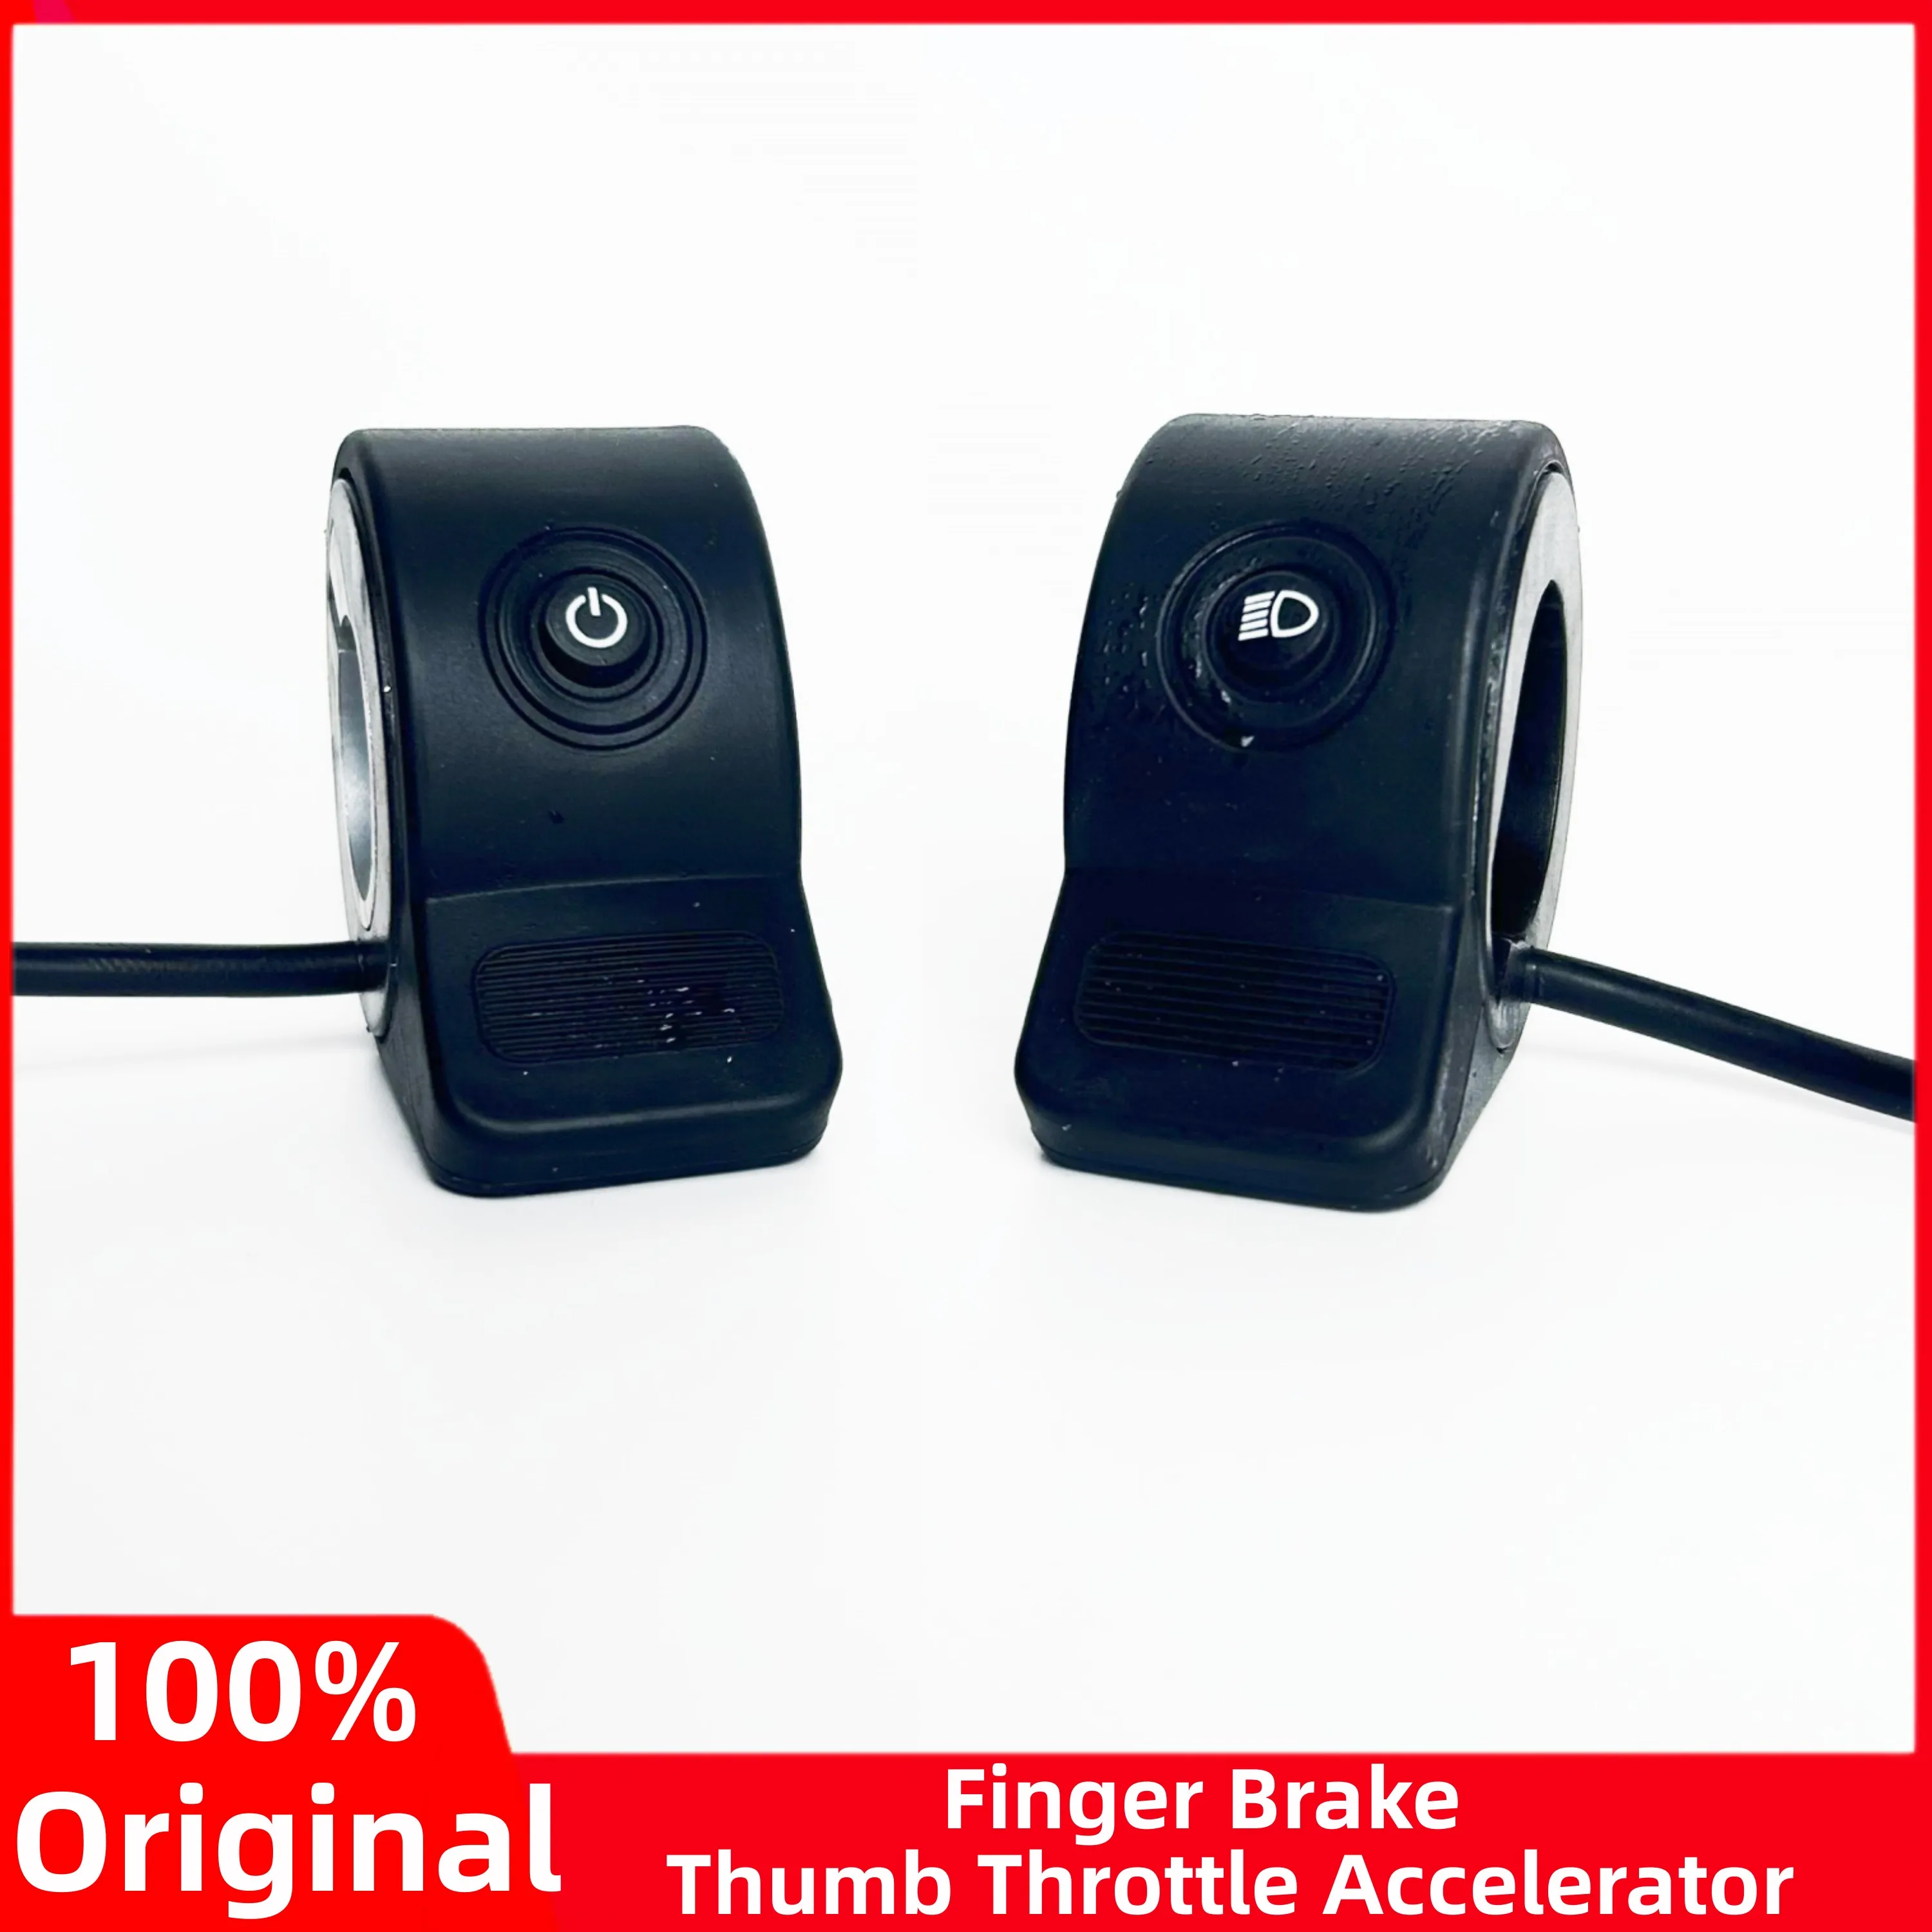 

Thumb Throttle Accelerator Speed Control Finger Brake Parts For KUGOO S1 PLUS Electric Scooter Trigger Shifter Dial Accessories